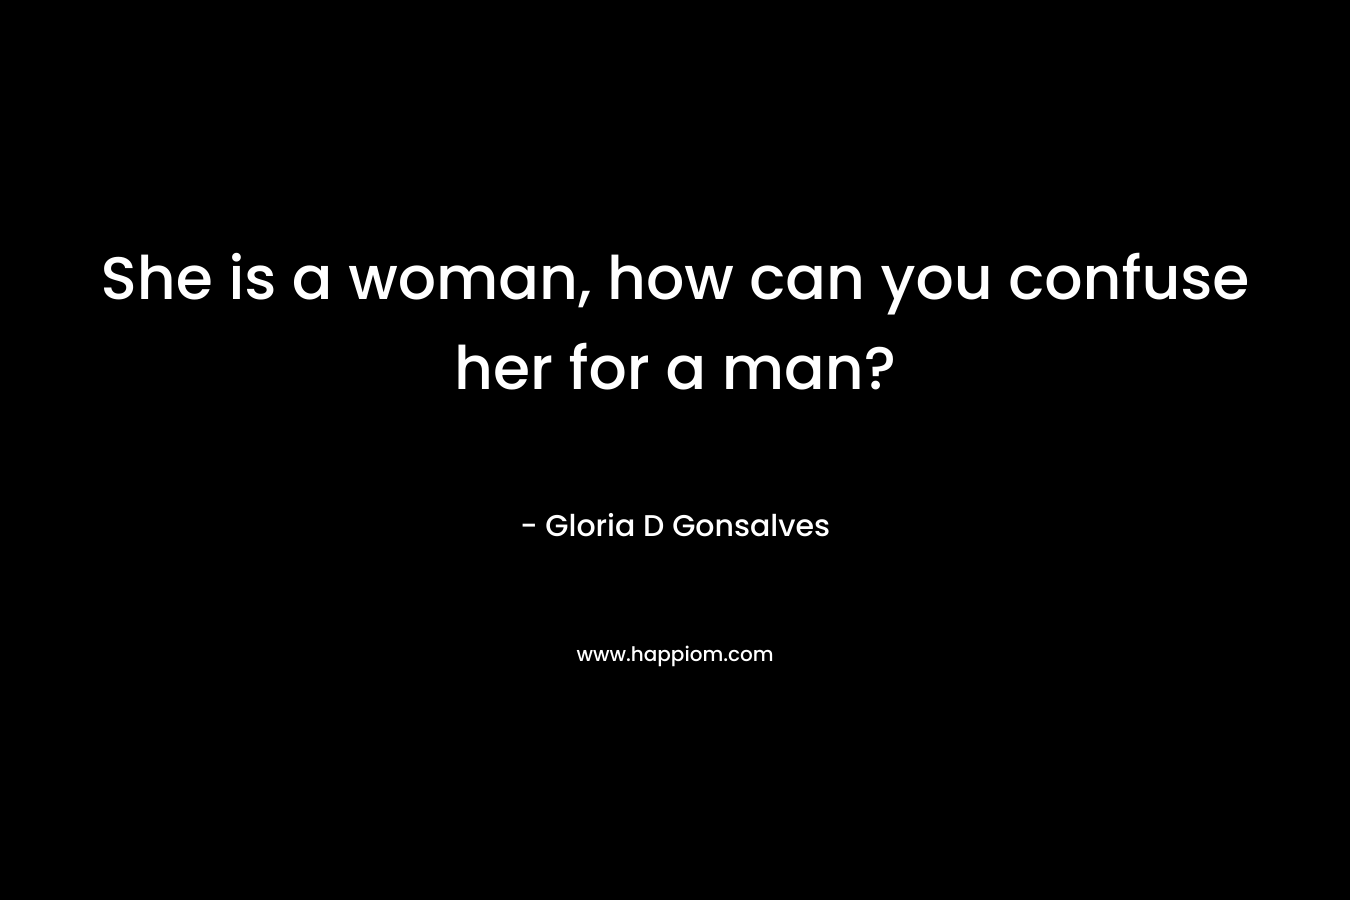 She is a woman, how can you confuse her for a man?